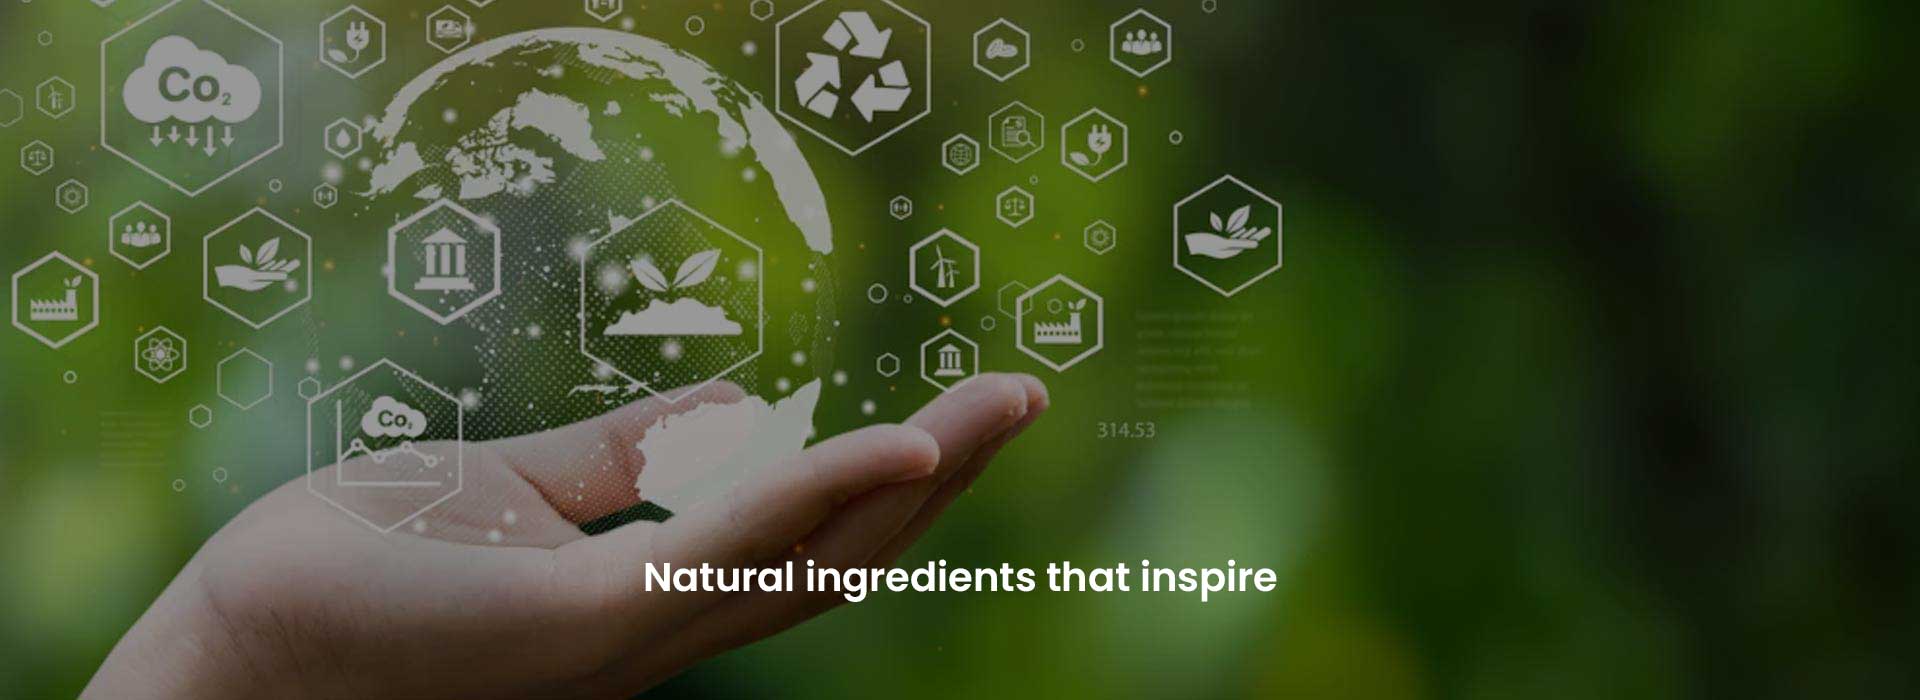 Natural ingredients that inspire.